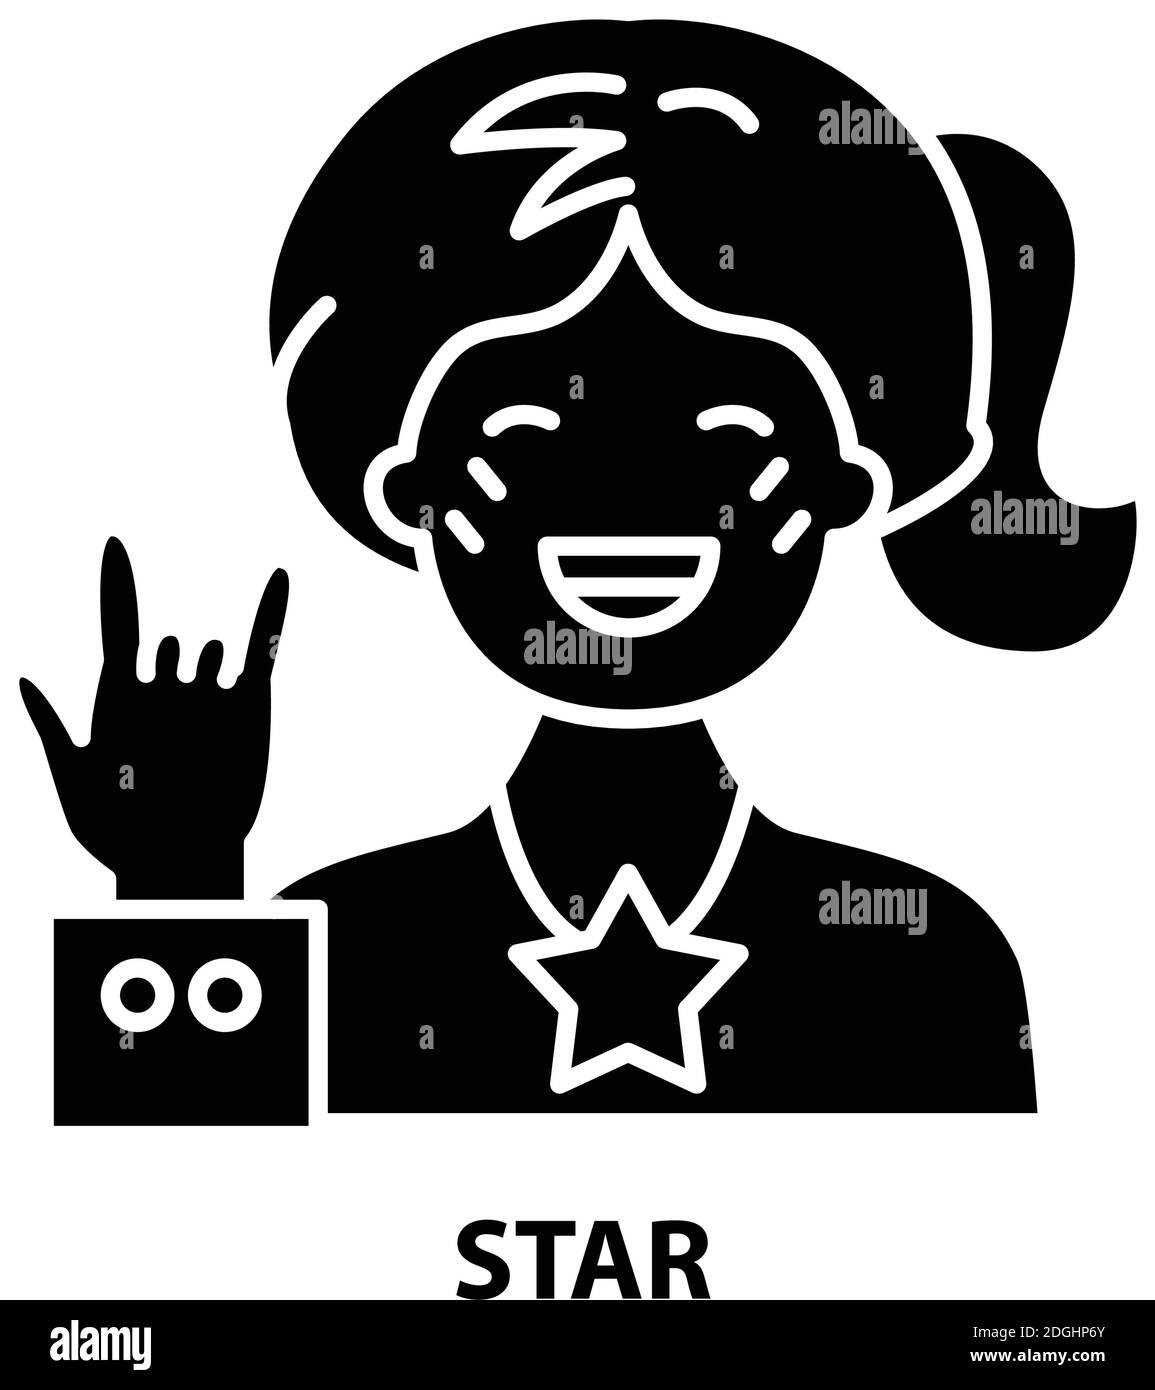 star icon, black vector sign with editable strokes, concept illustration Stock Vector